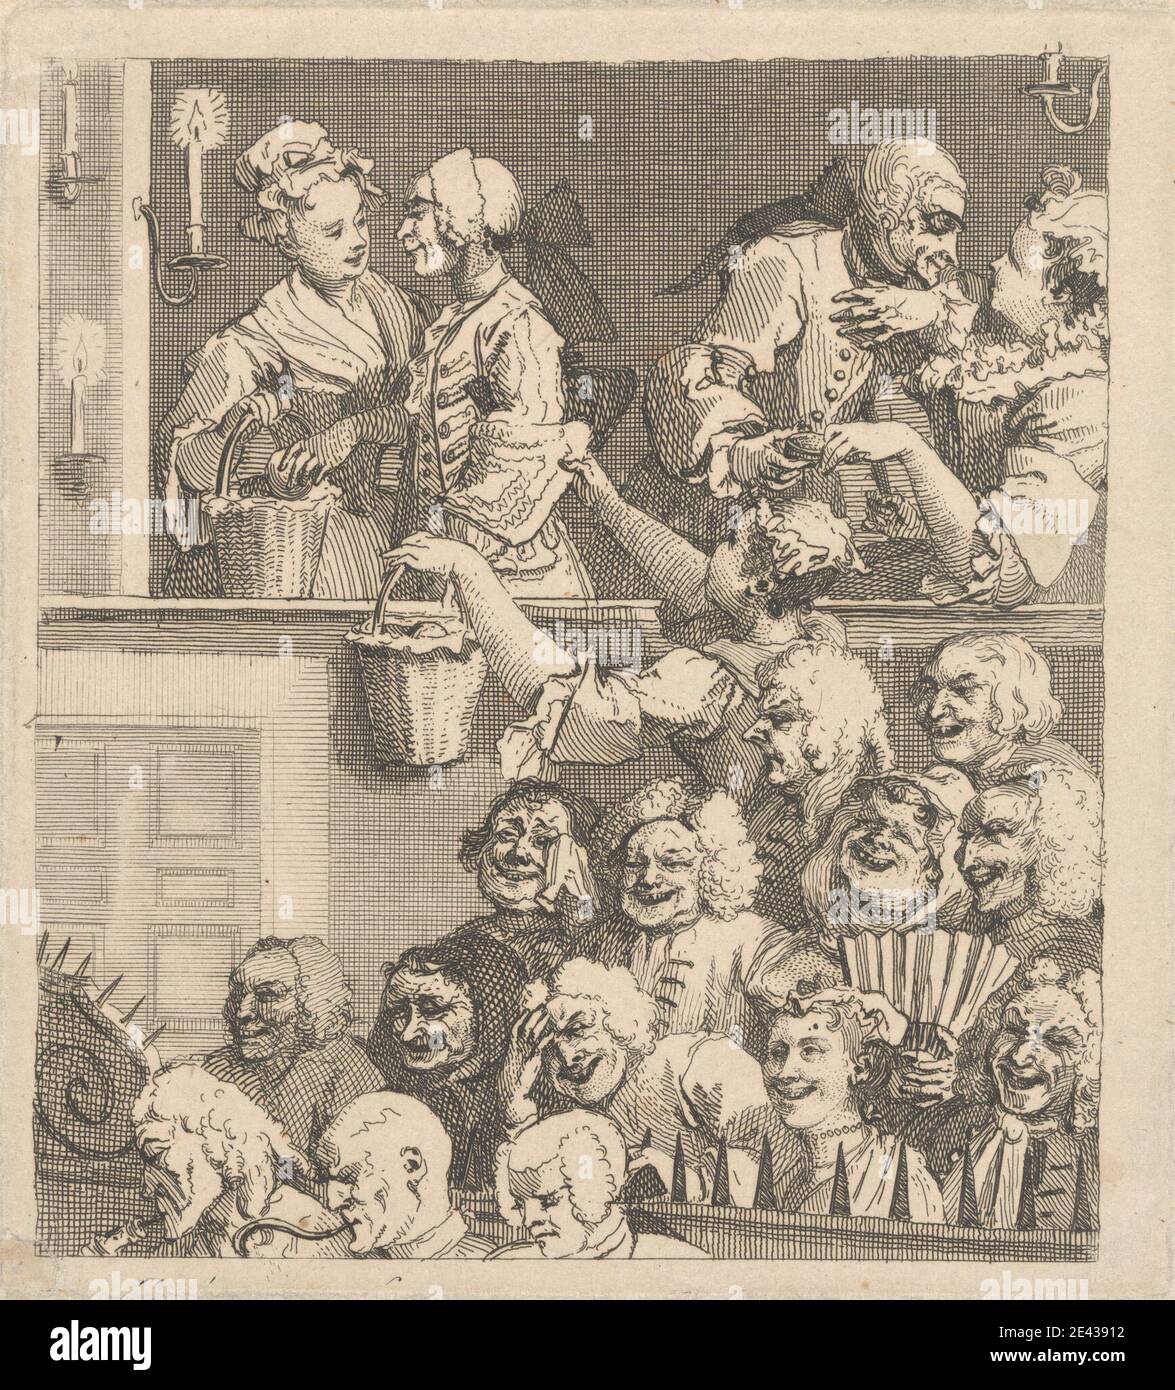 William Hogarth, 1697â€“1764, British, The Laughing Audience, 1733. Engraving. Stock Photo